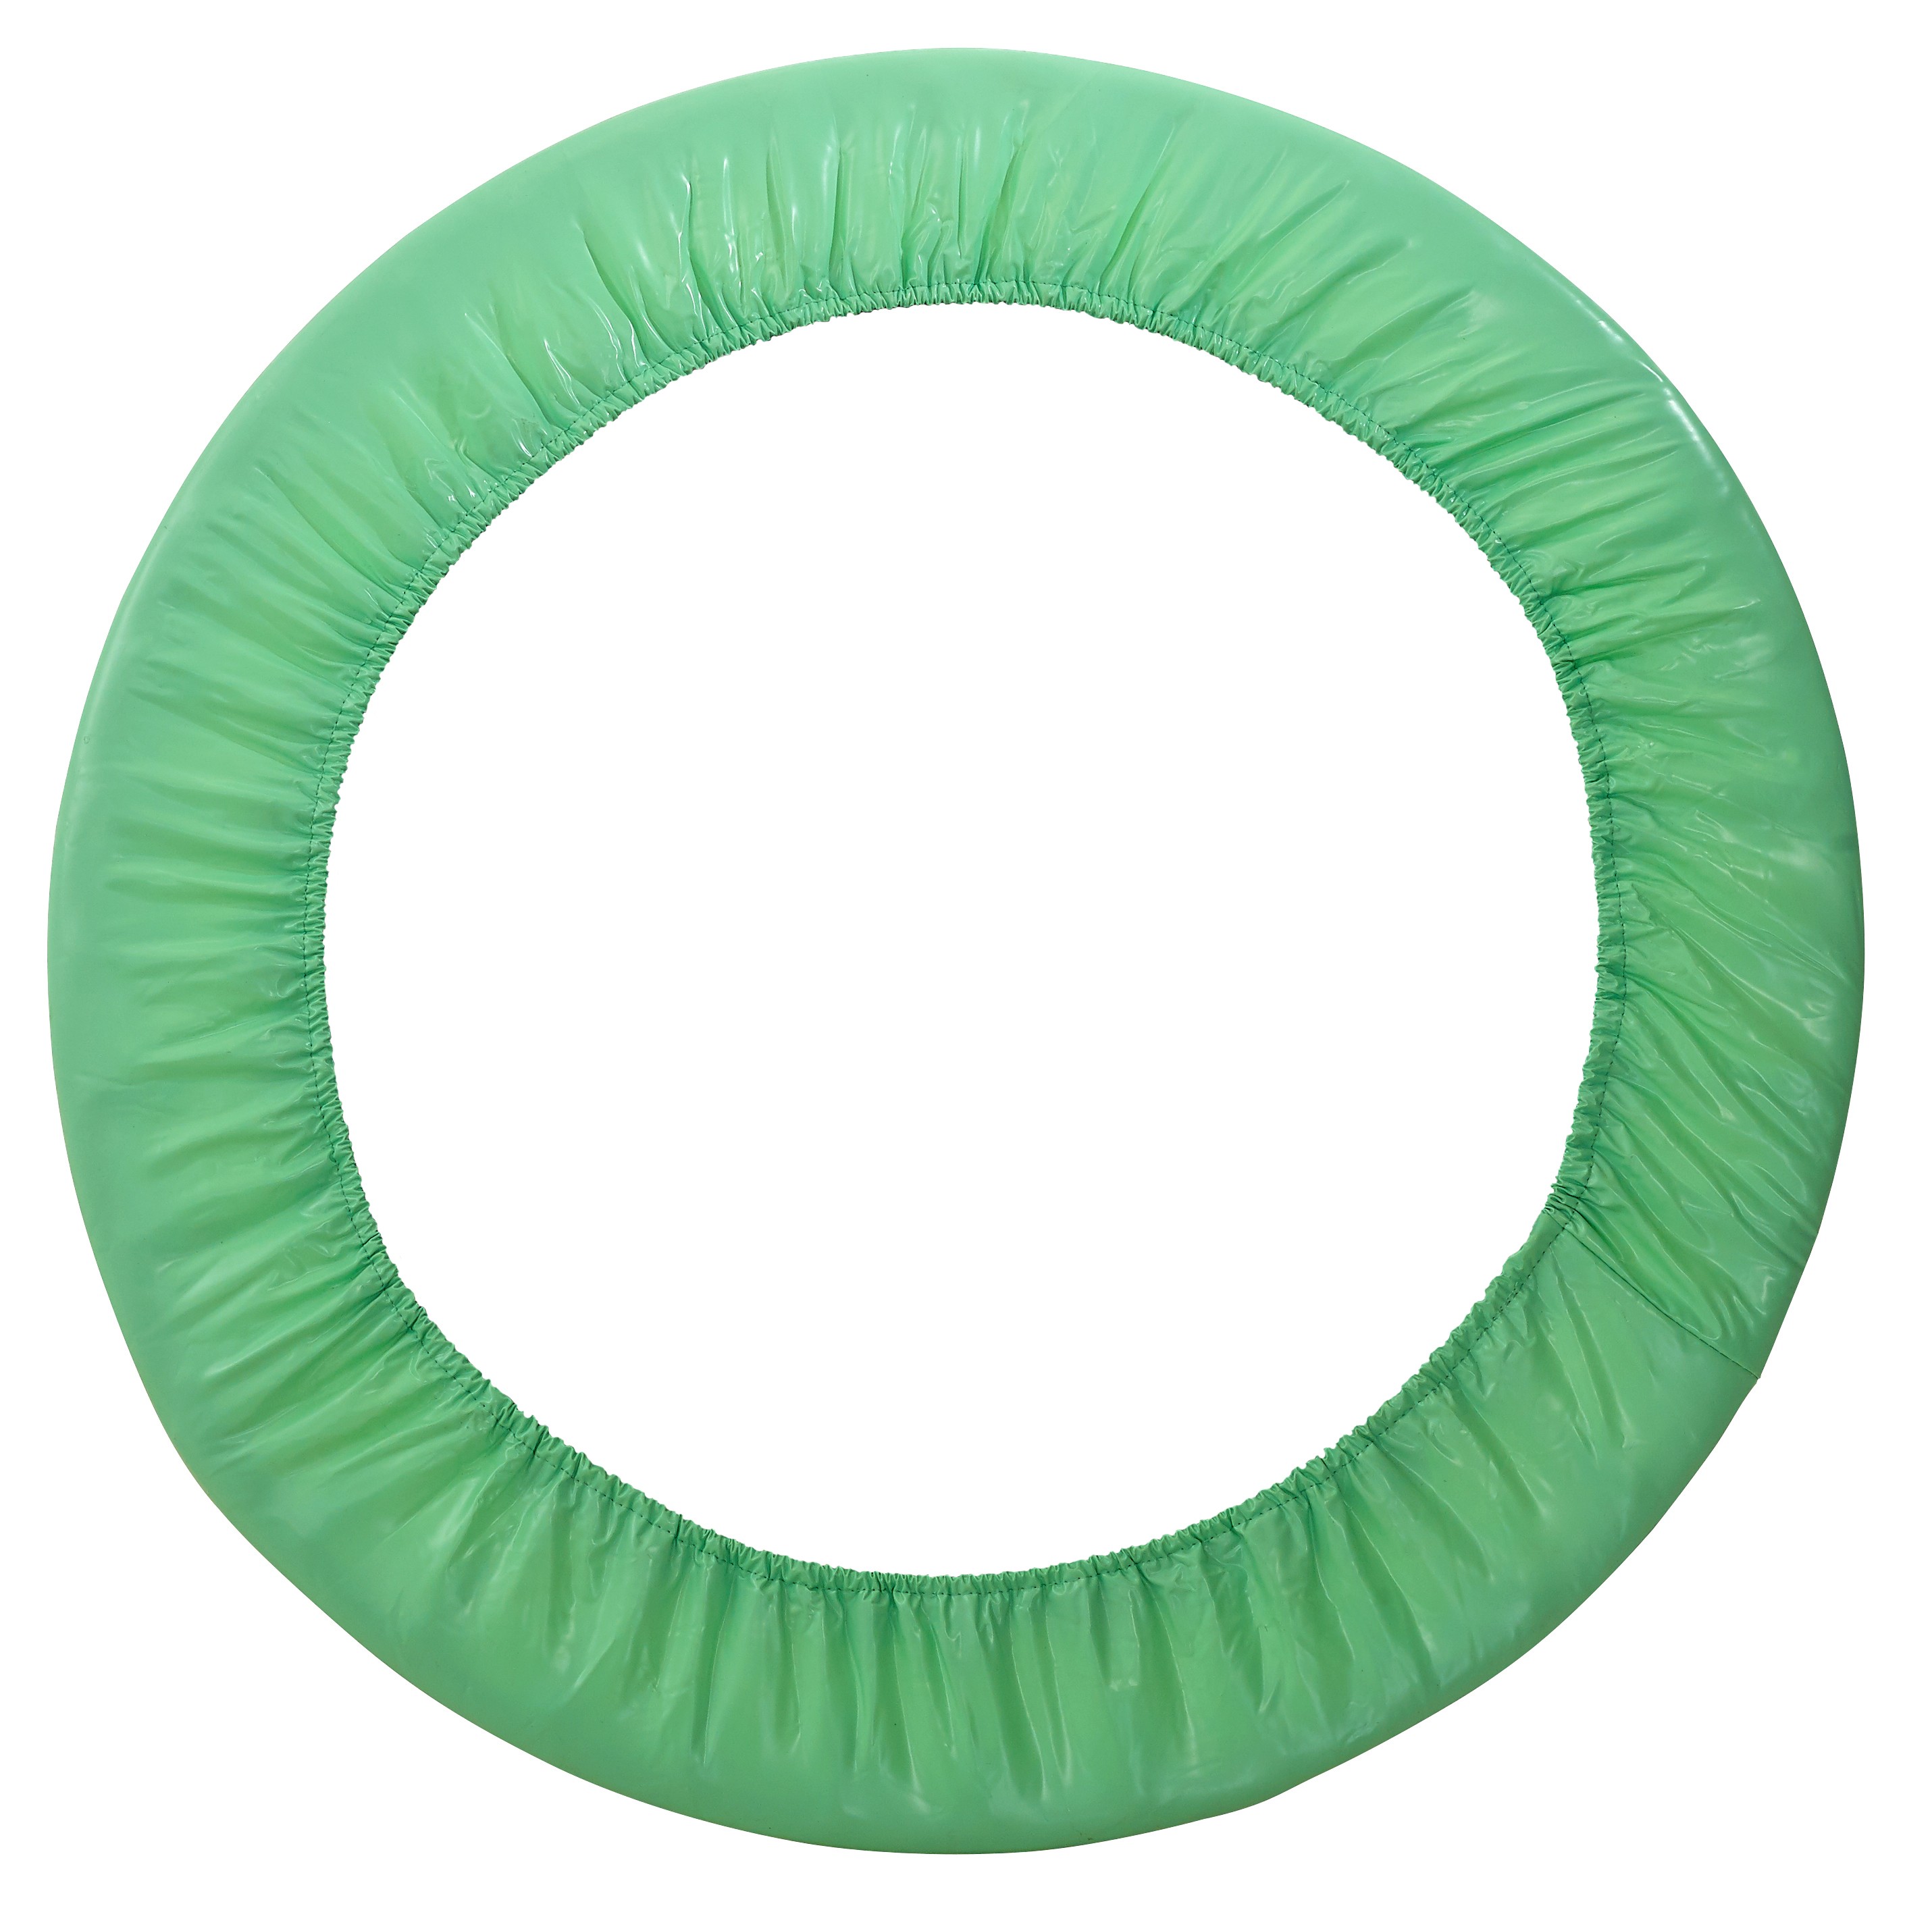 40" Mini Round Trampoline Replacement Safety Pad (Spring Cover) for 6 Legs | Green